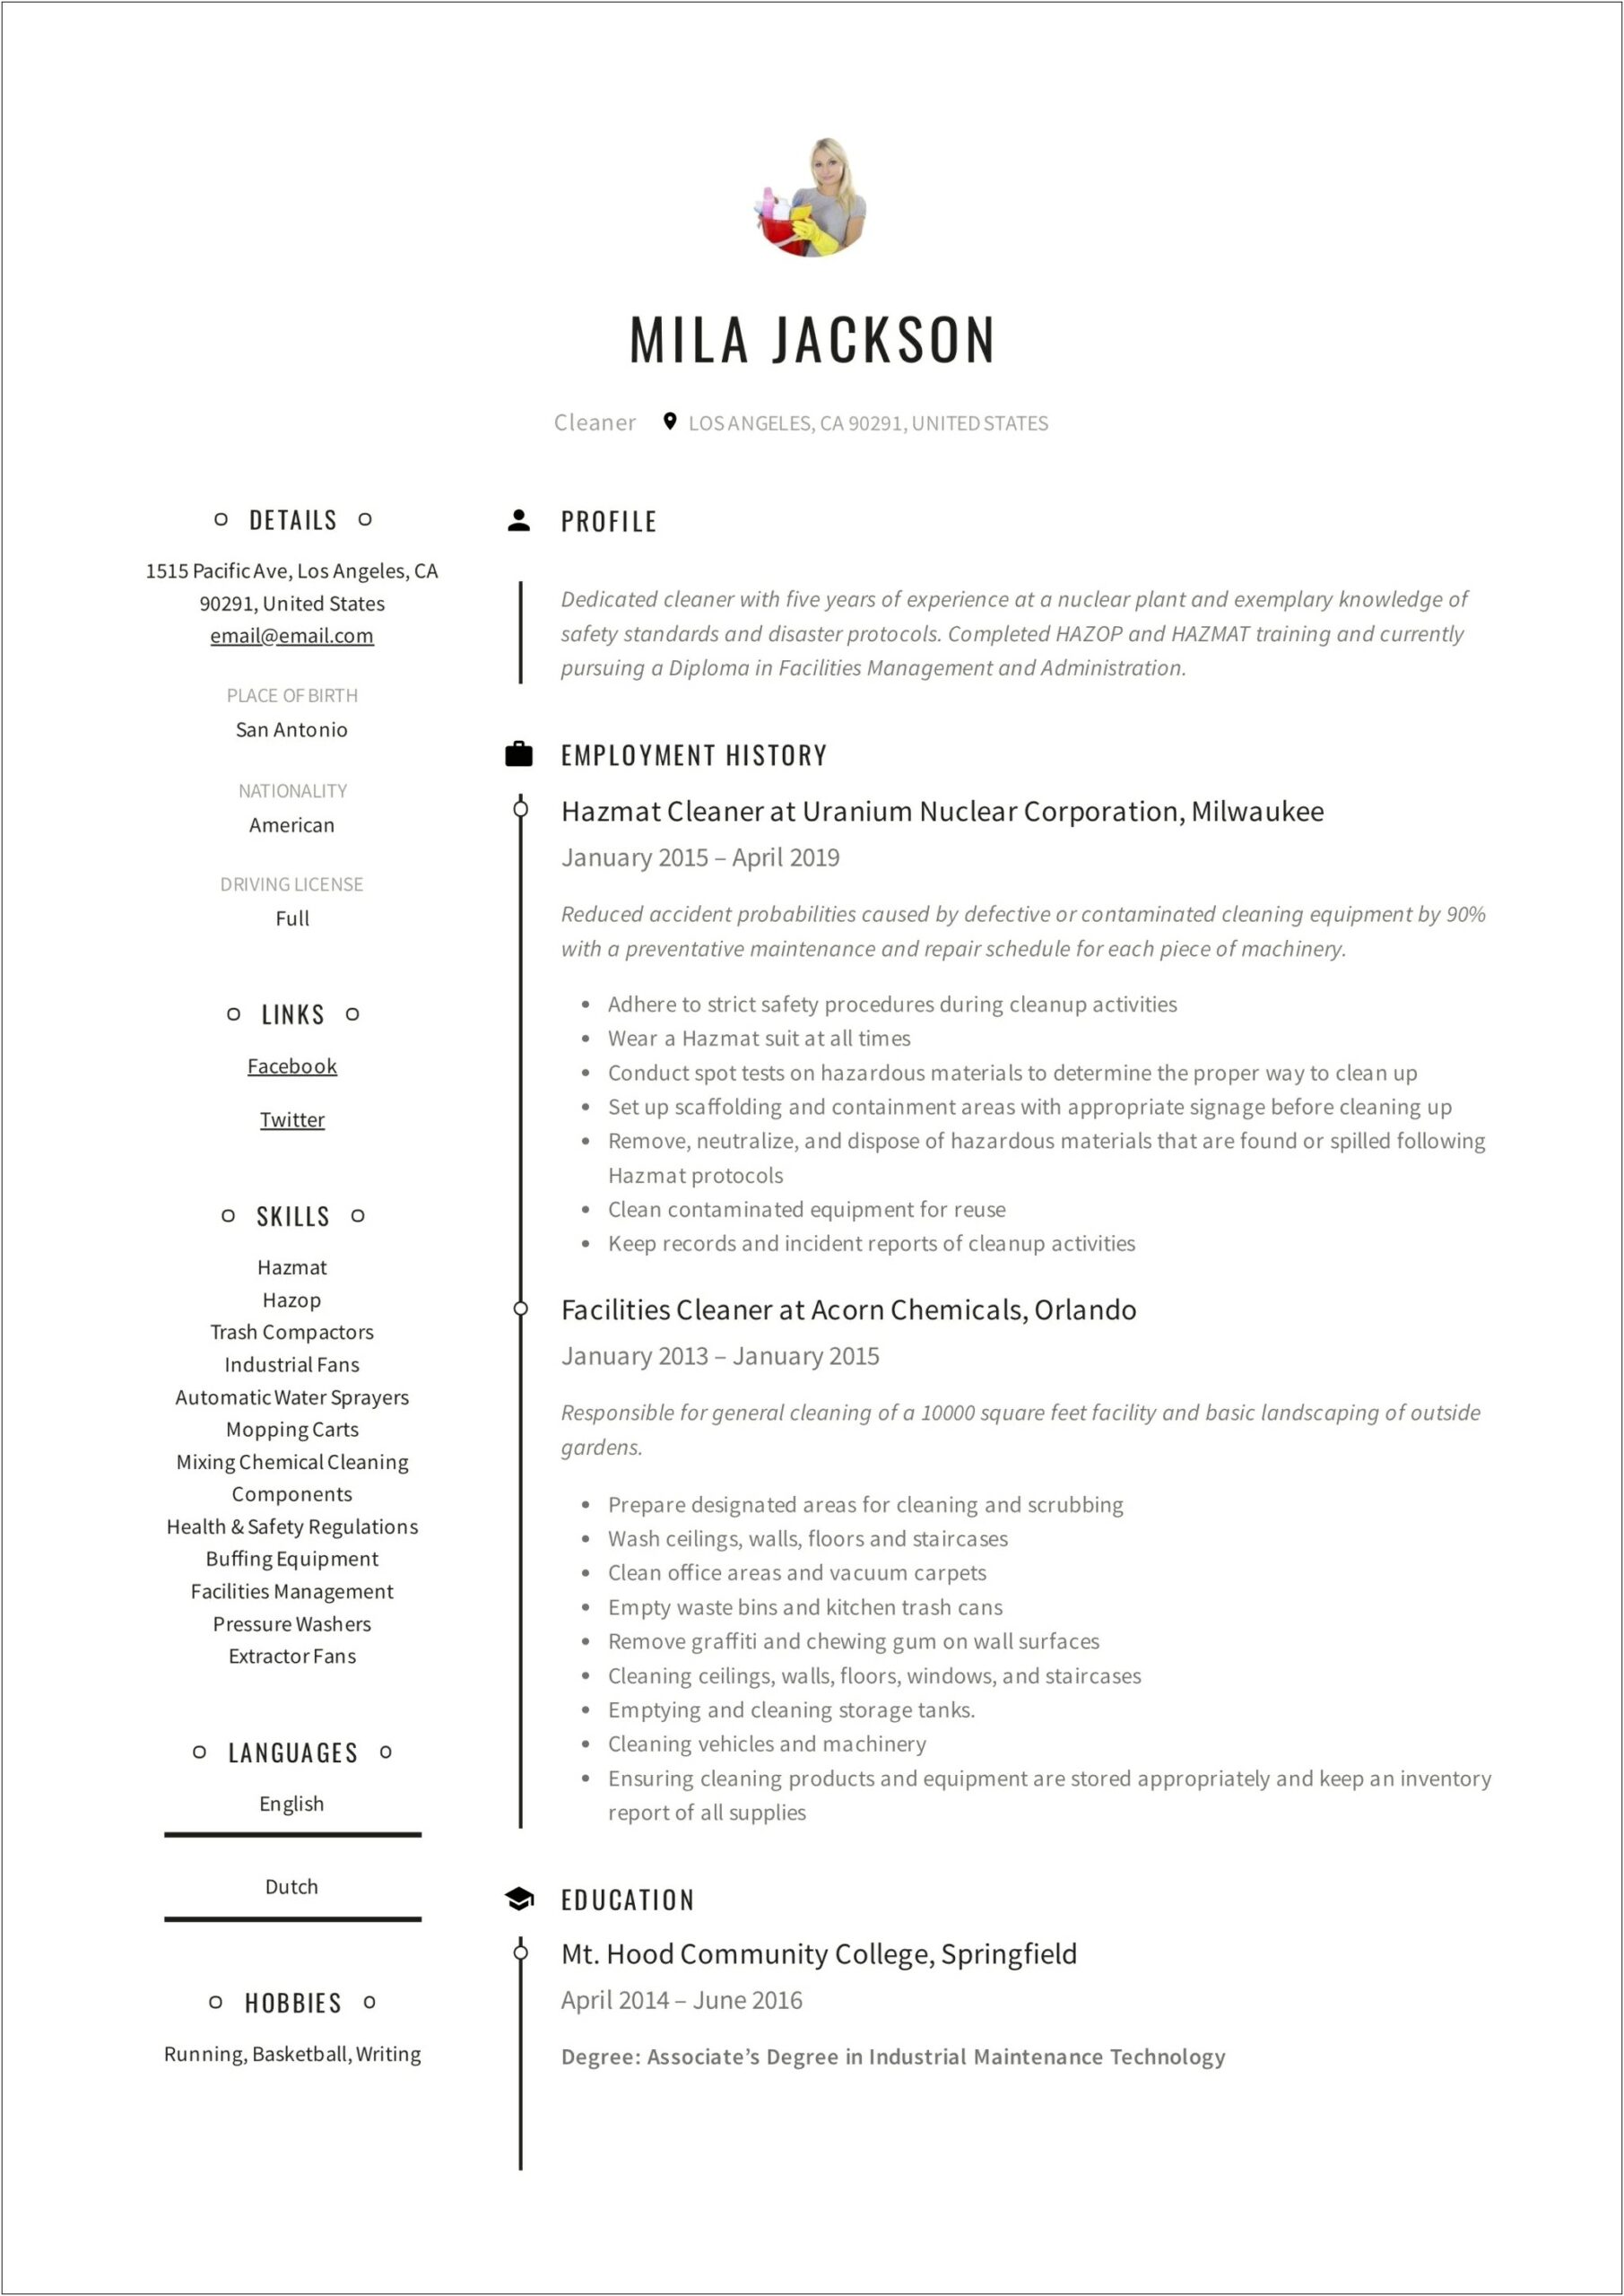 Example Resume For Housekeeping With No Experience